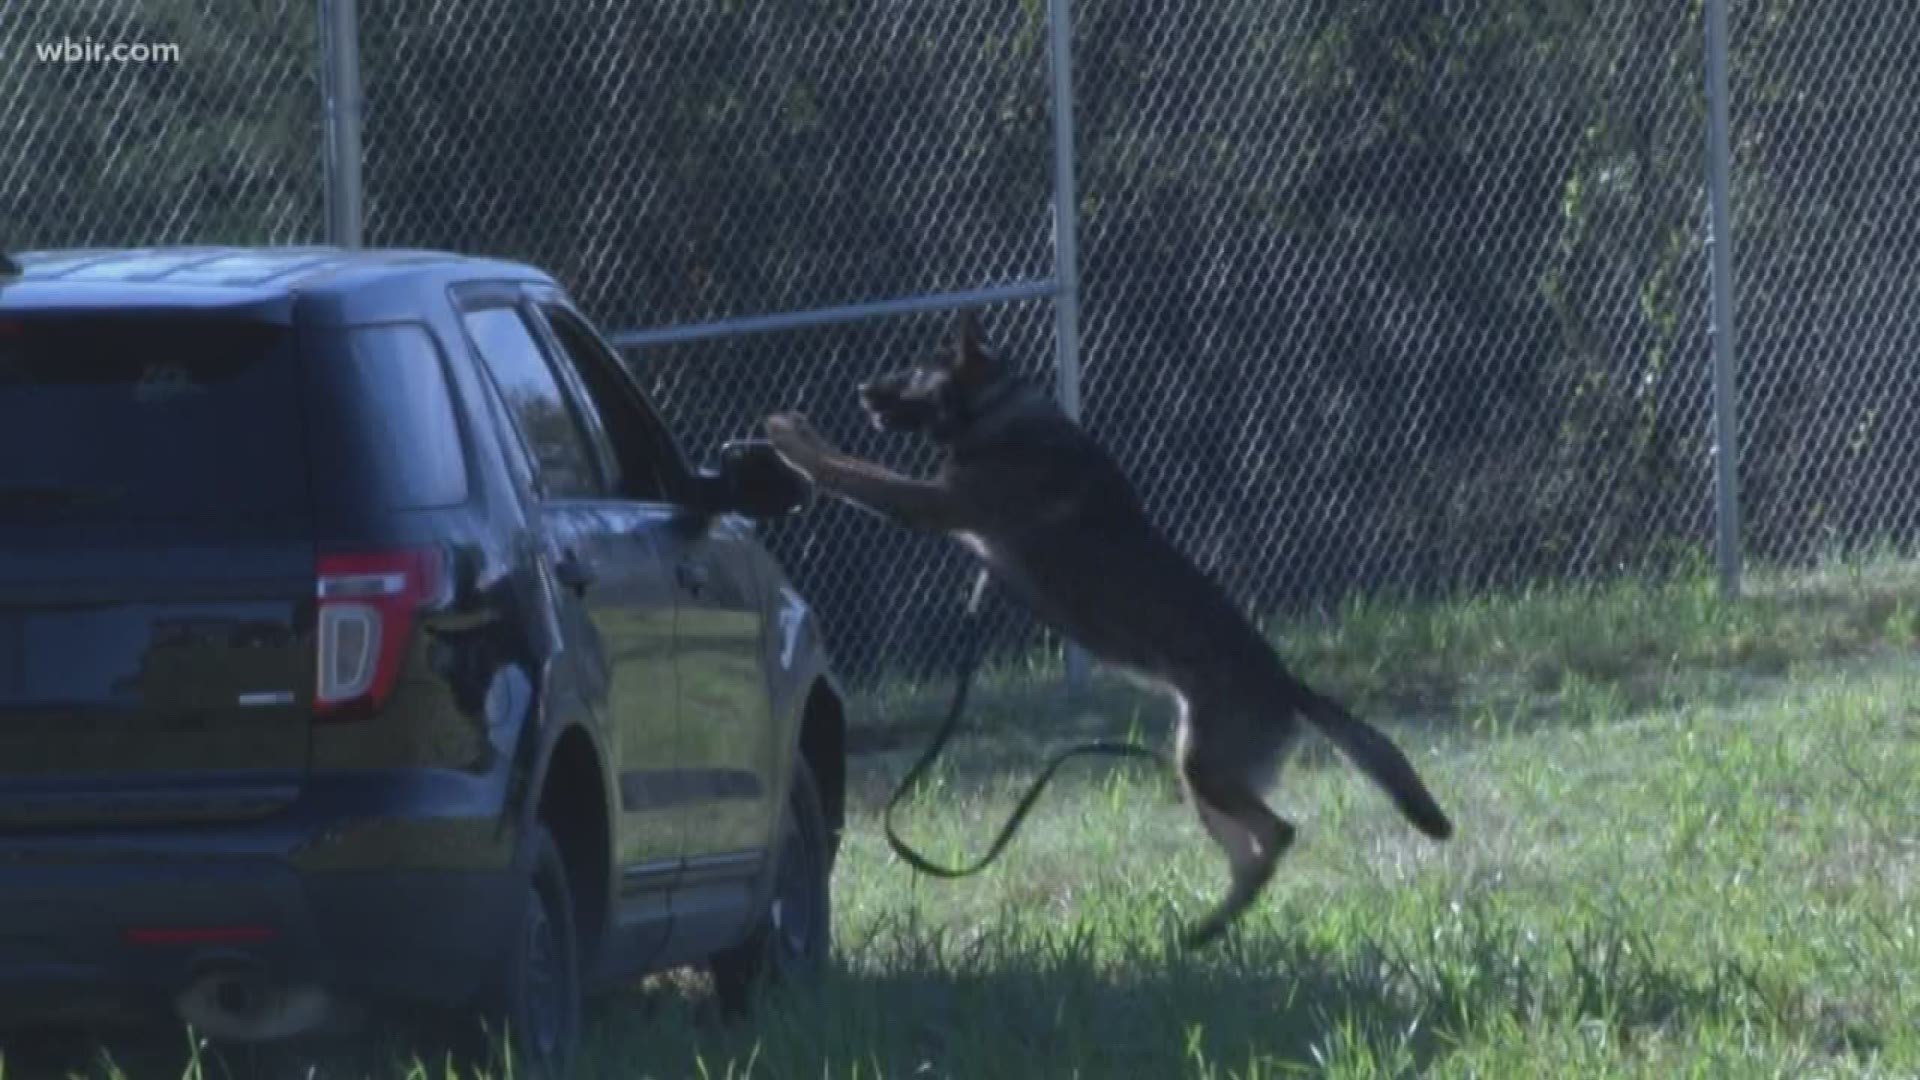 K-9 officers and their handlers demonstrated their skills on an obstacle course Friday.